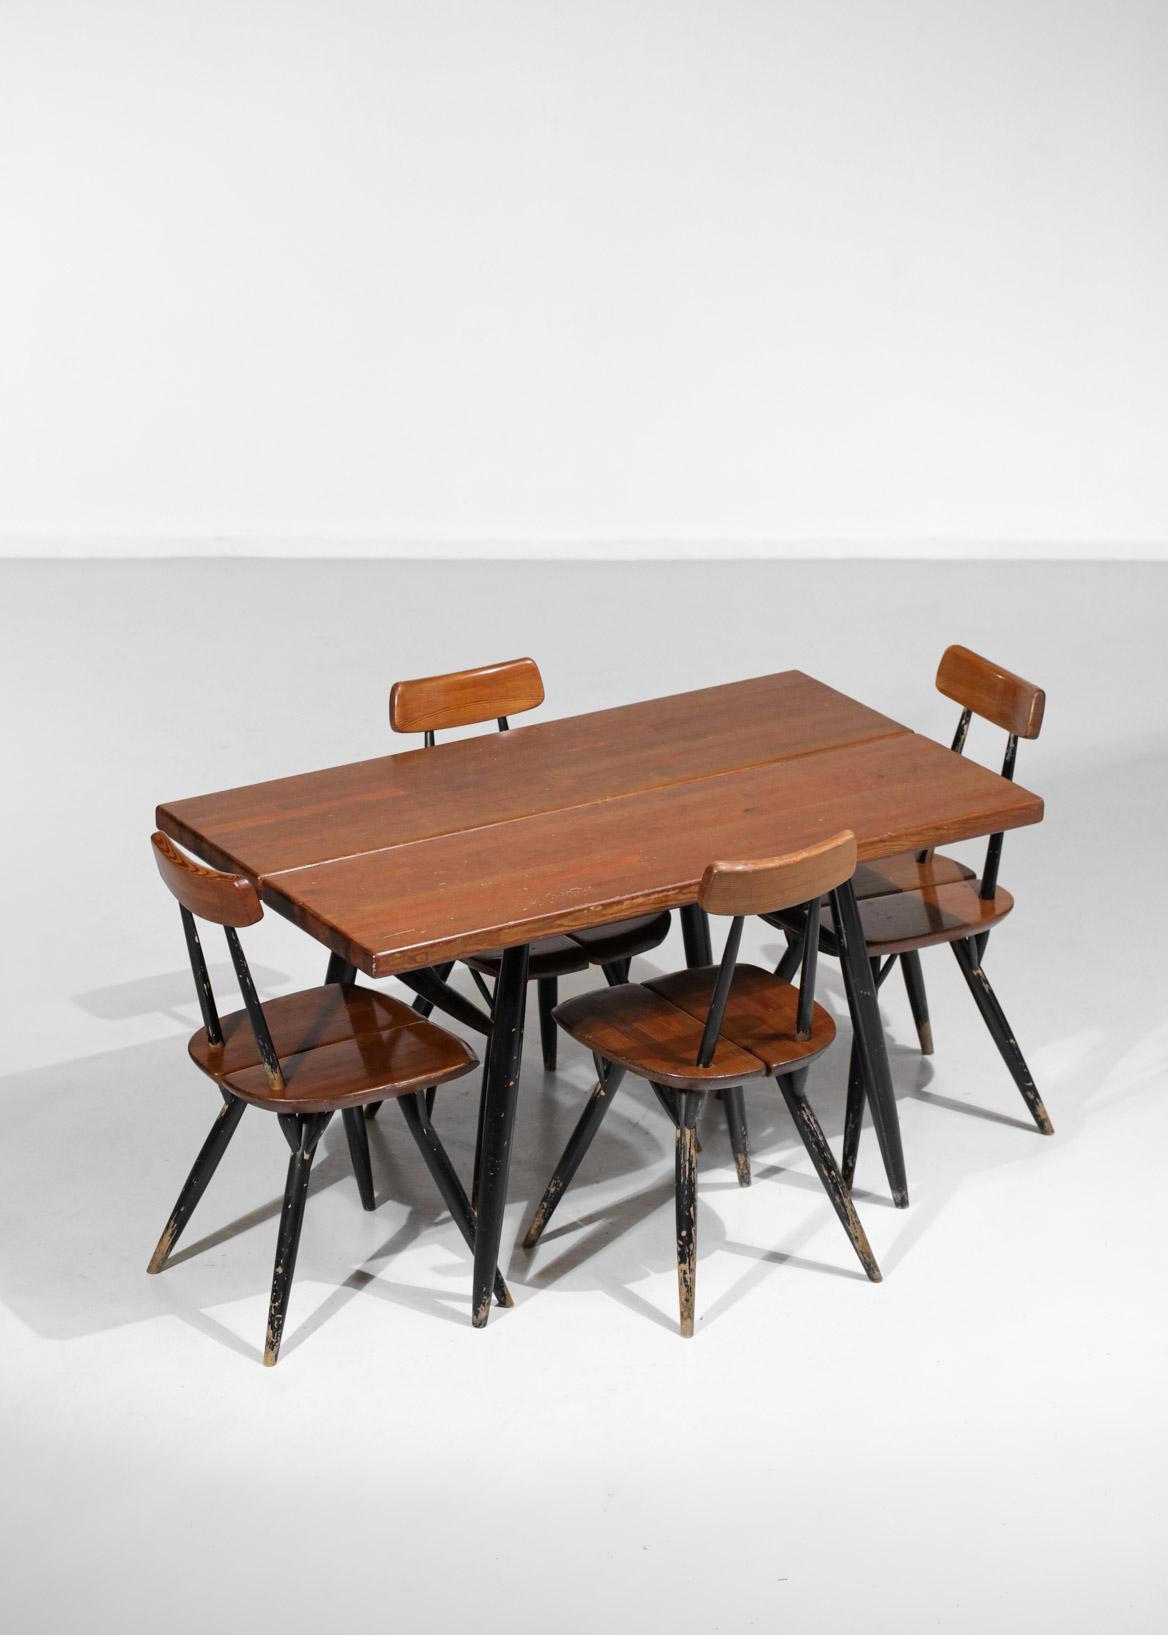 Beautiful Scandinavian dining room set by Finnish designer Ilmani Tapiovaara from the 1950s for Laukaan Puu. It is composed of a dining table and four chairs model 